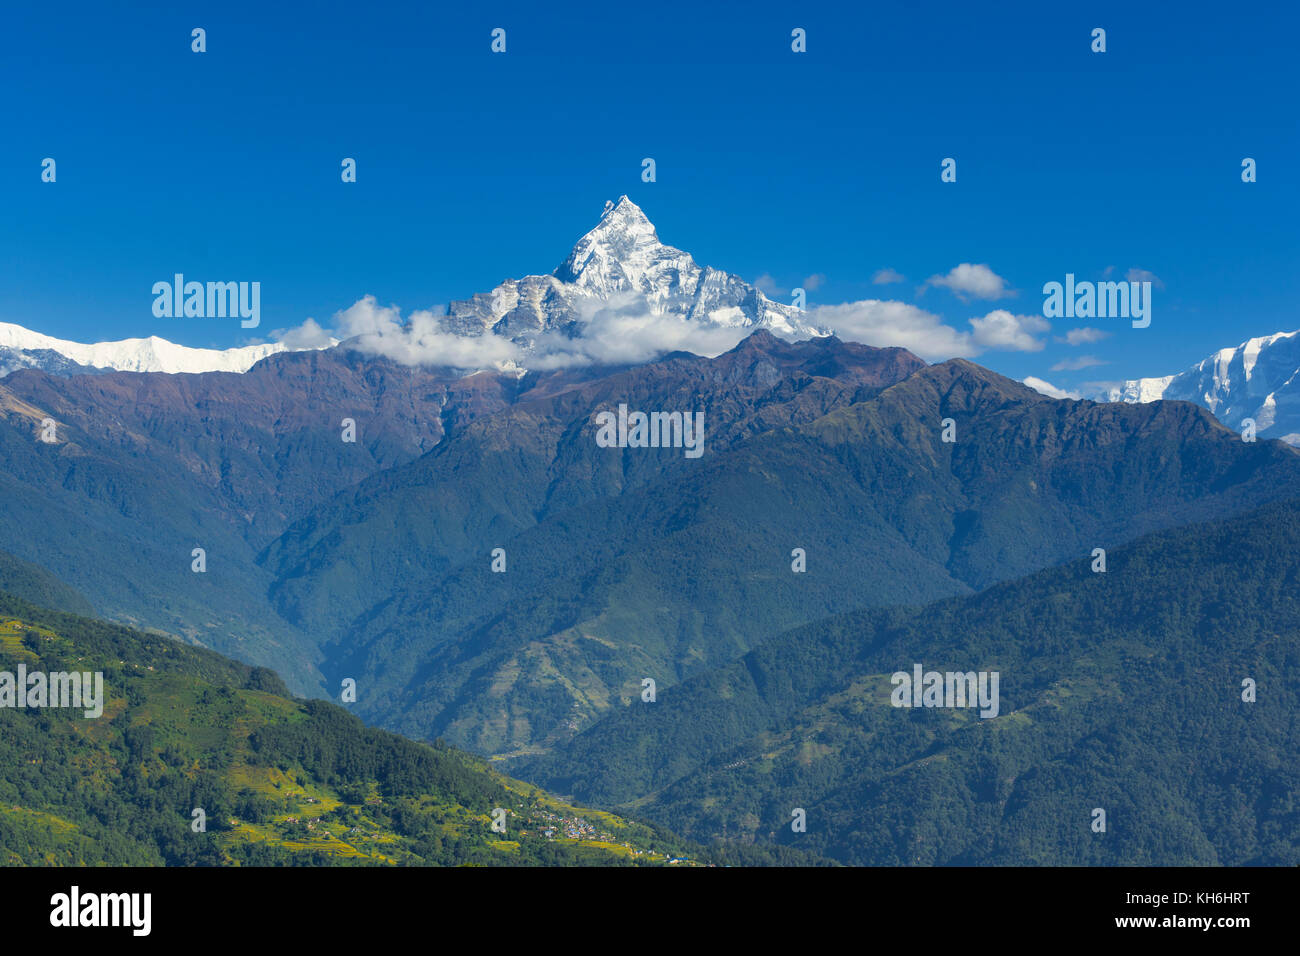 View of Fishtail or Machhapuchare Mountain from Dhampus village, Nepal Stock Photo